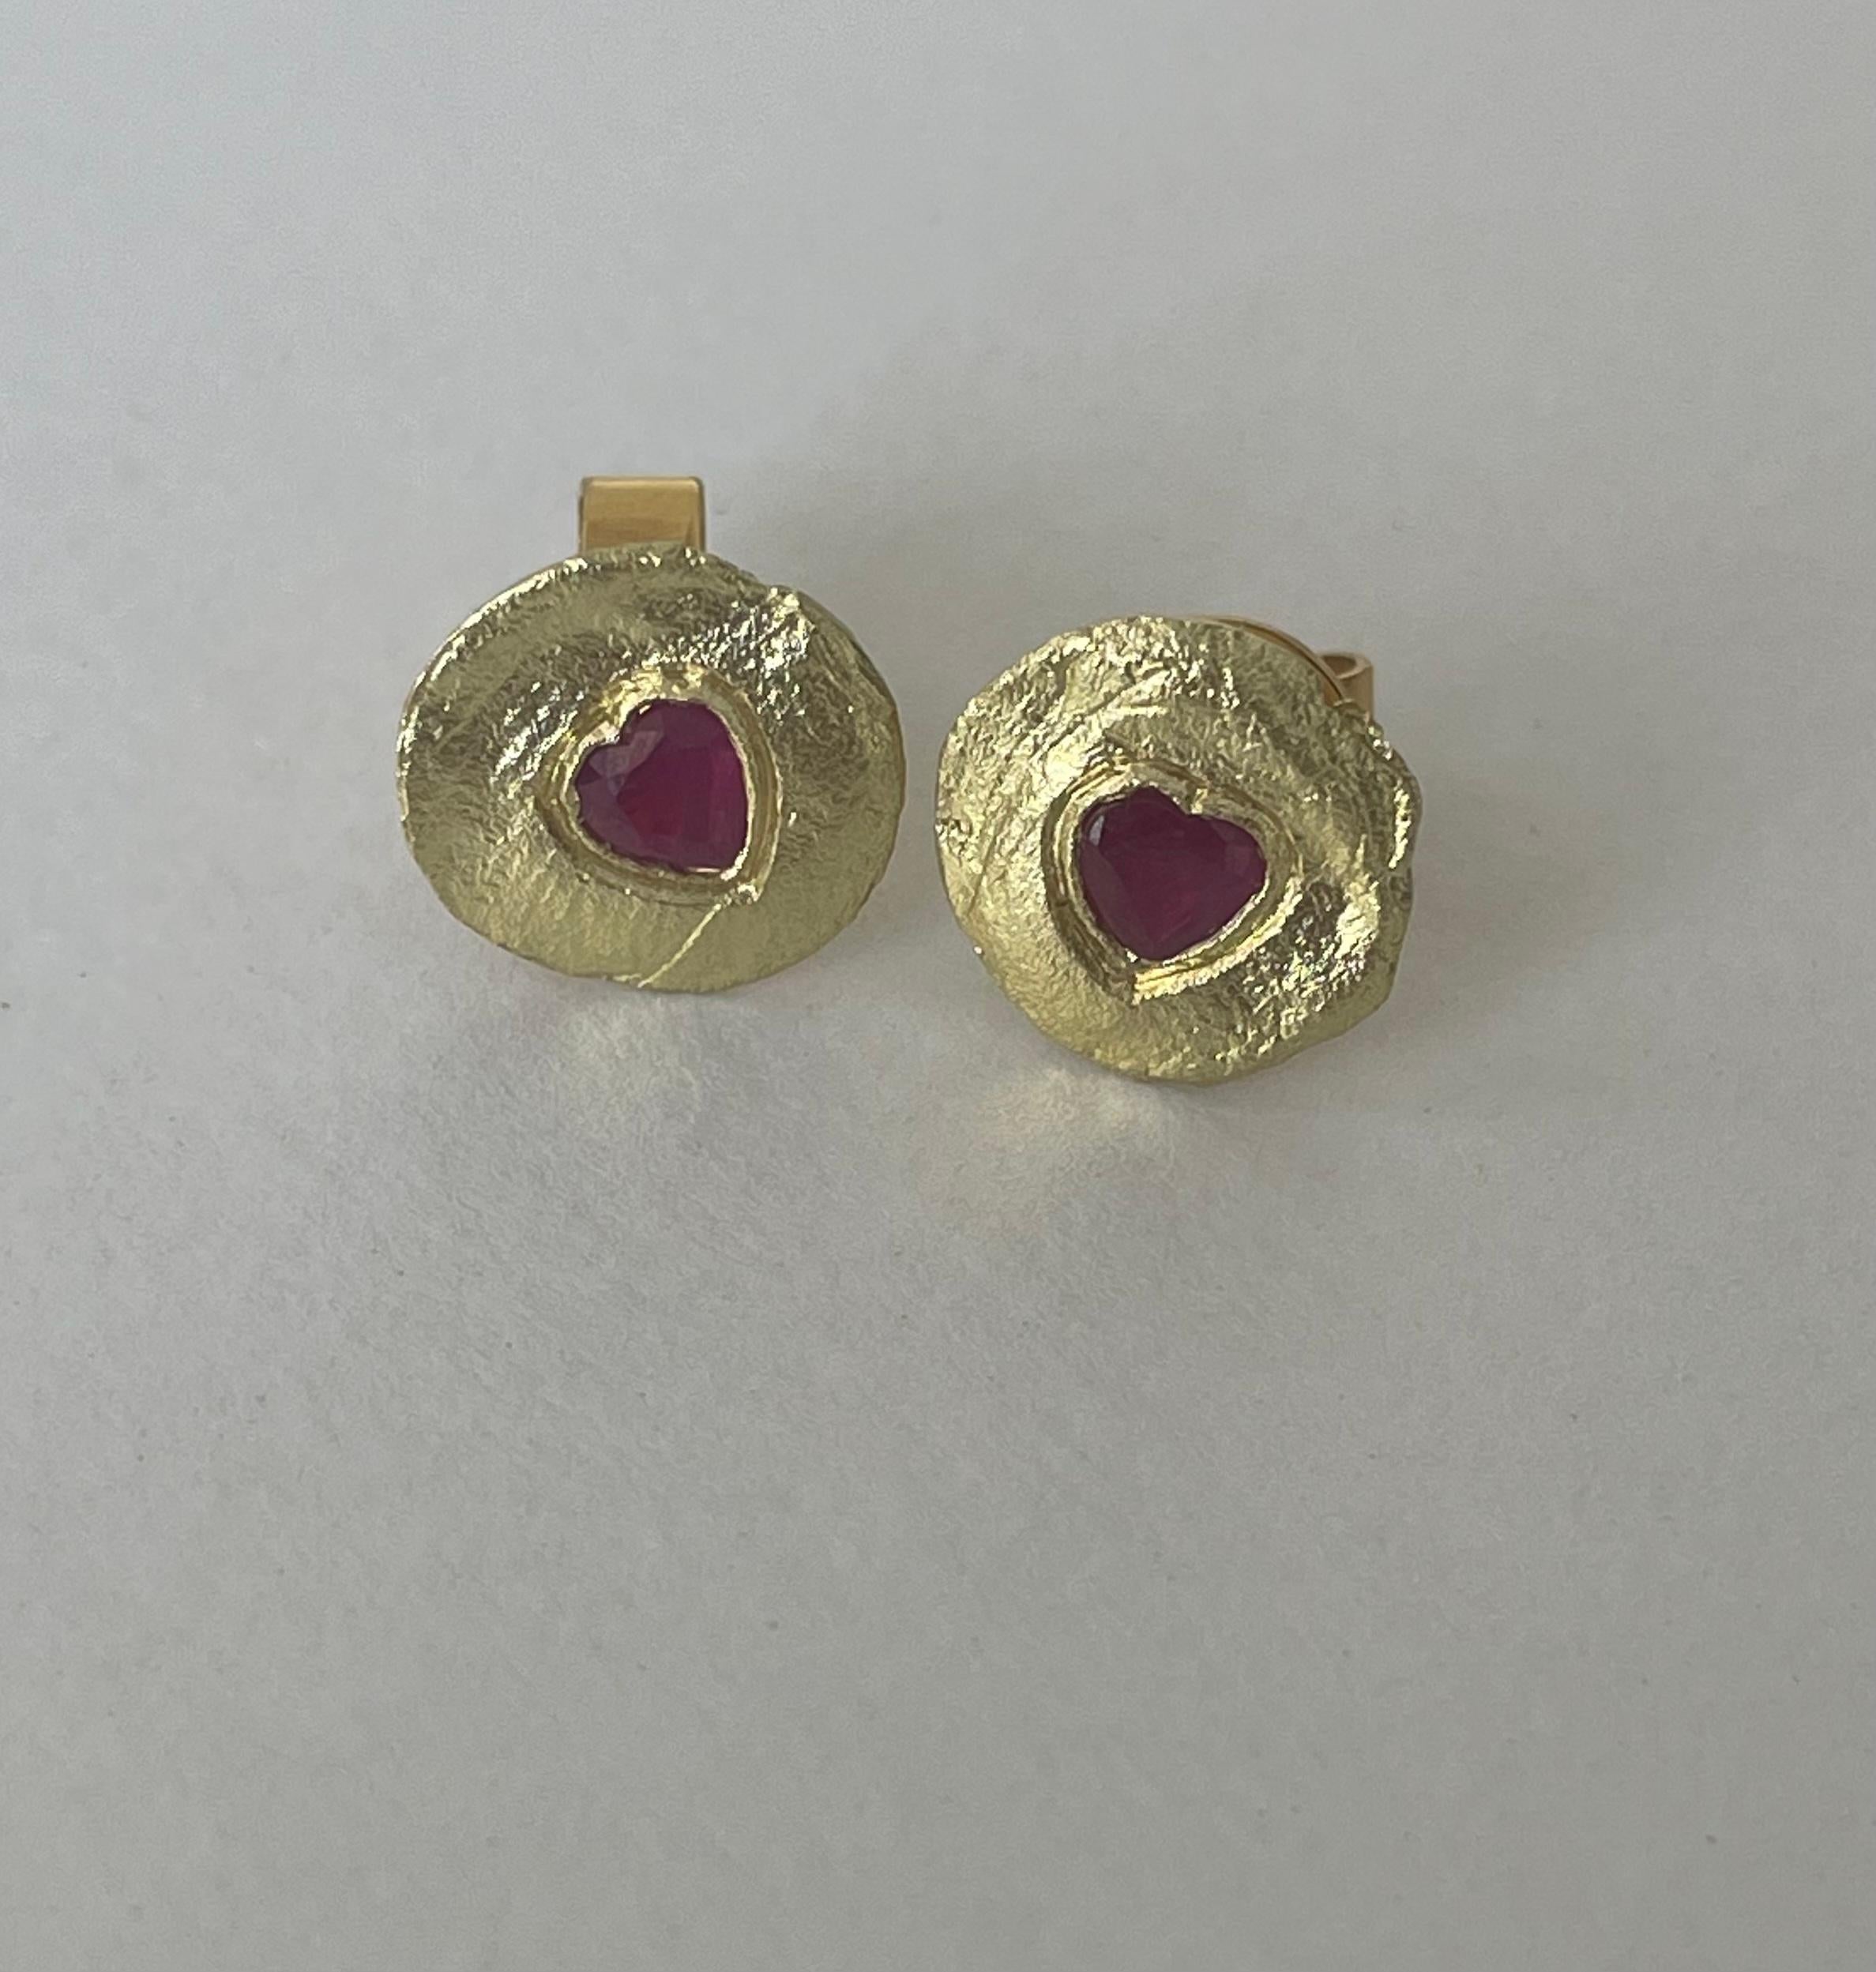 Brilliant Cut Valentine’s Disc Earrings with 18k gold Ruby stone. For Sale